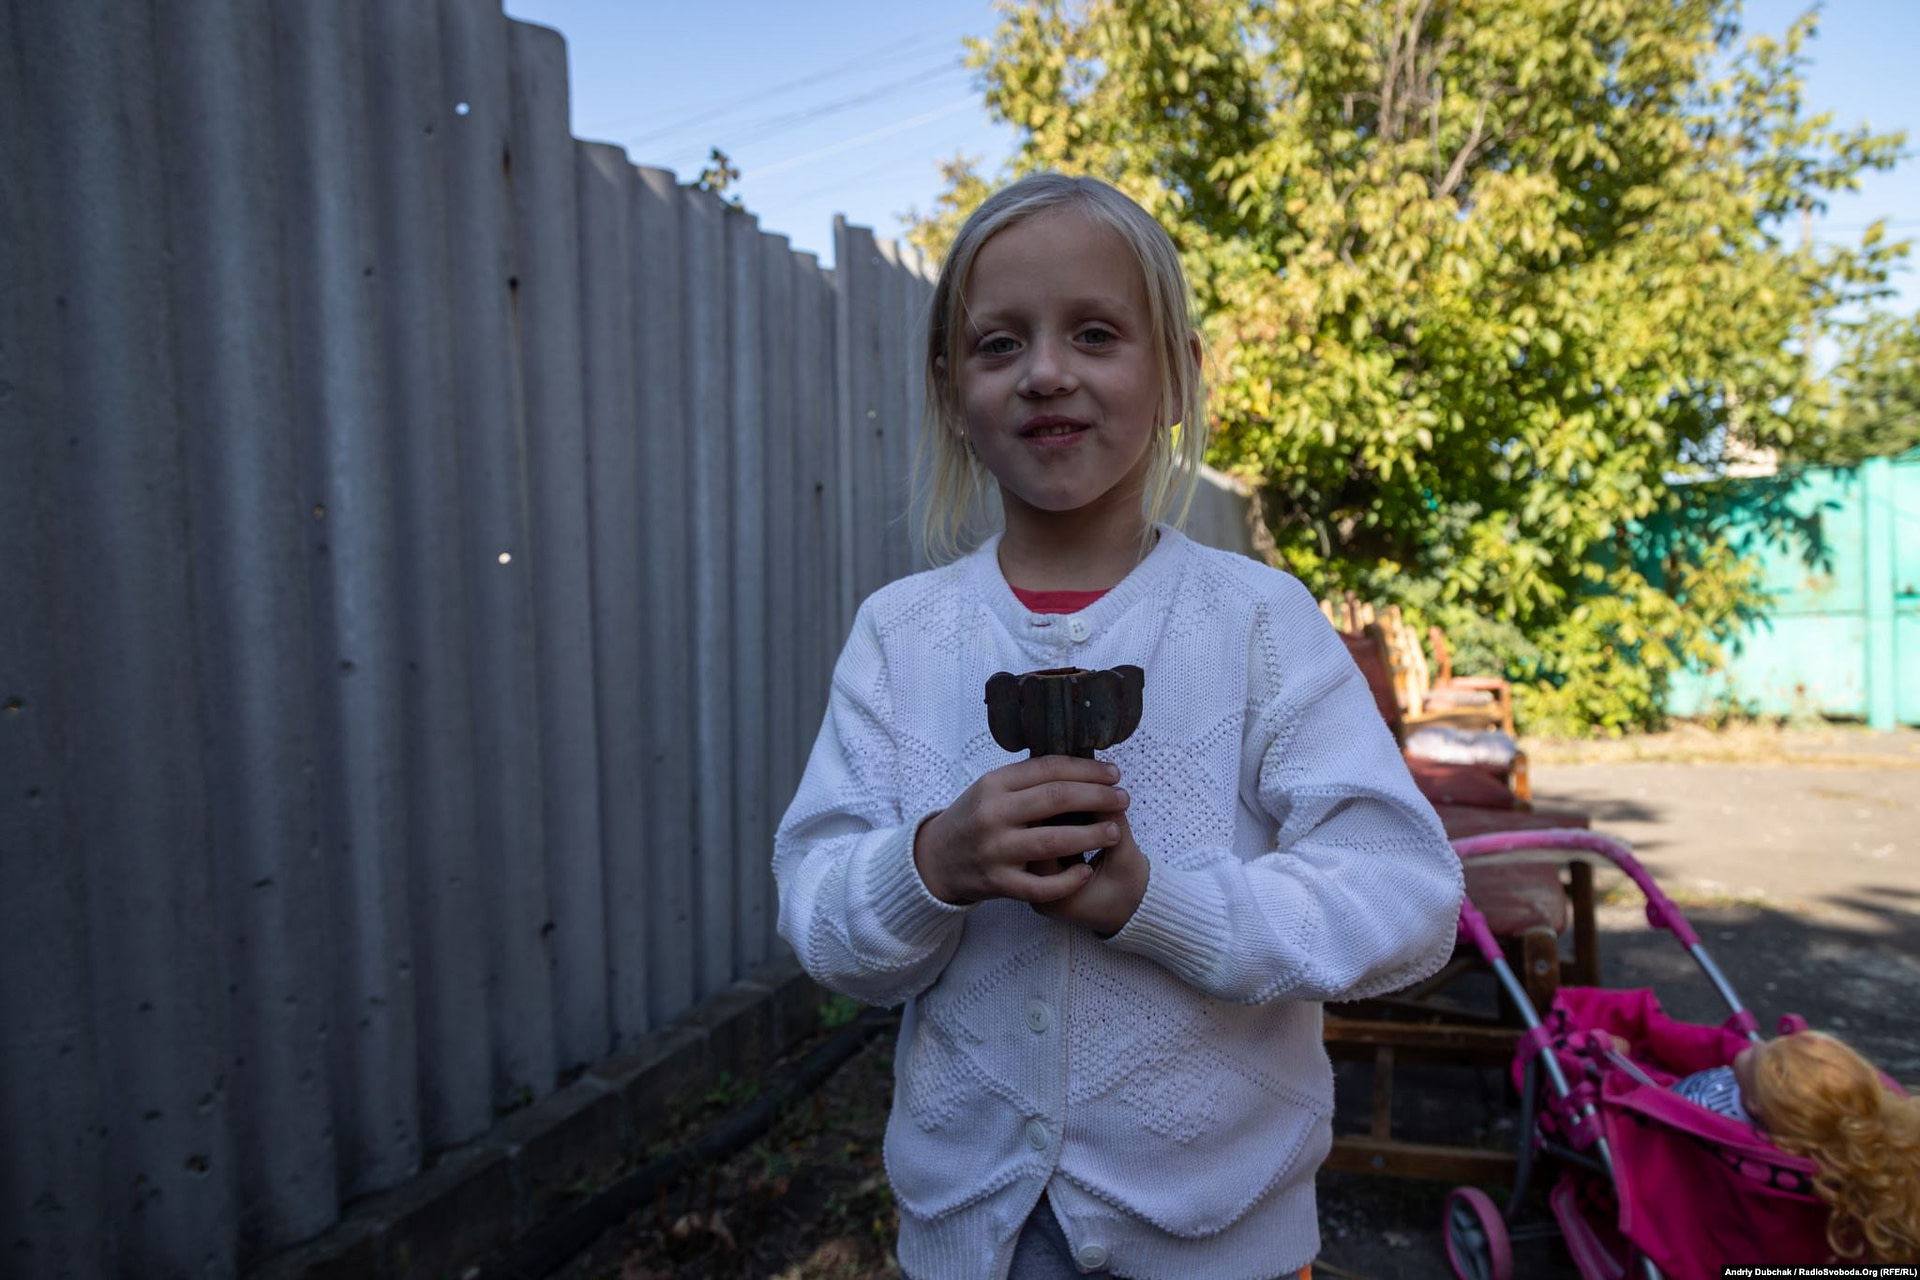 Toma holds part of the shell in a neighbor's yard, where her sister and brother were injured in Maryinka. (photo: Andriy Dubchak)